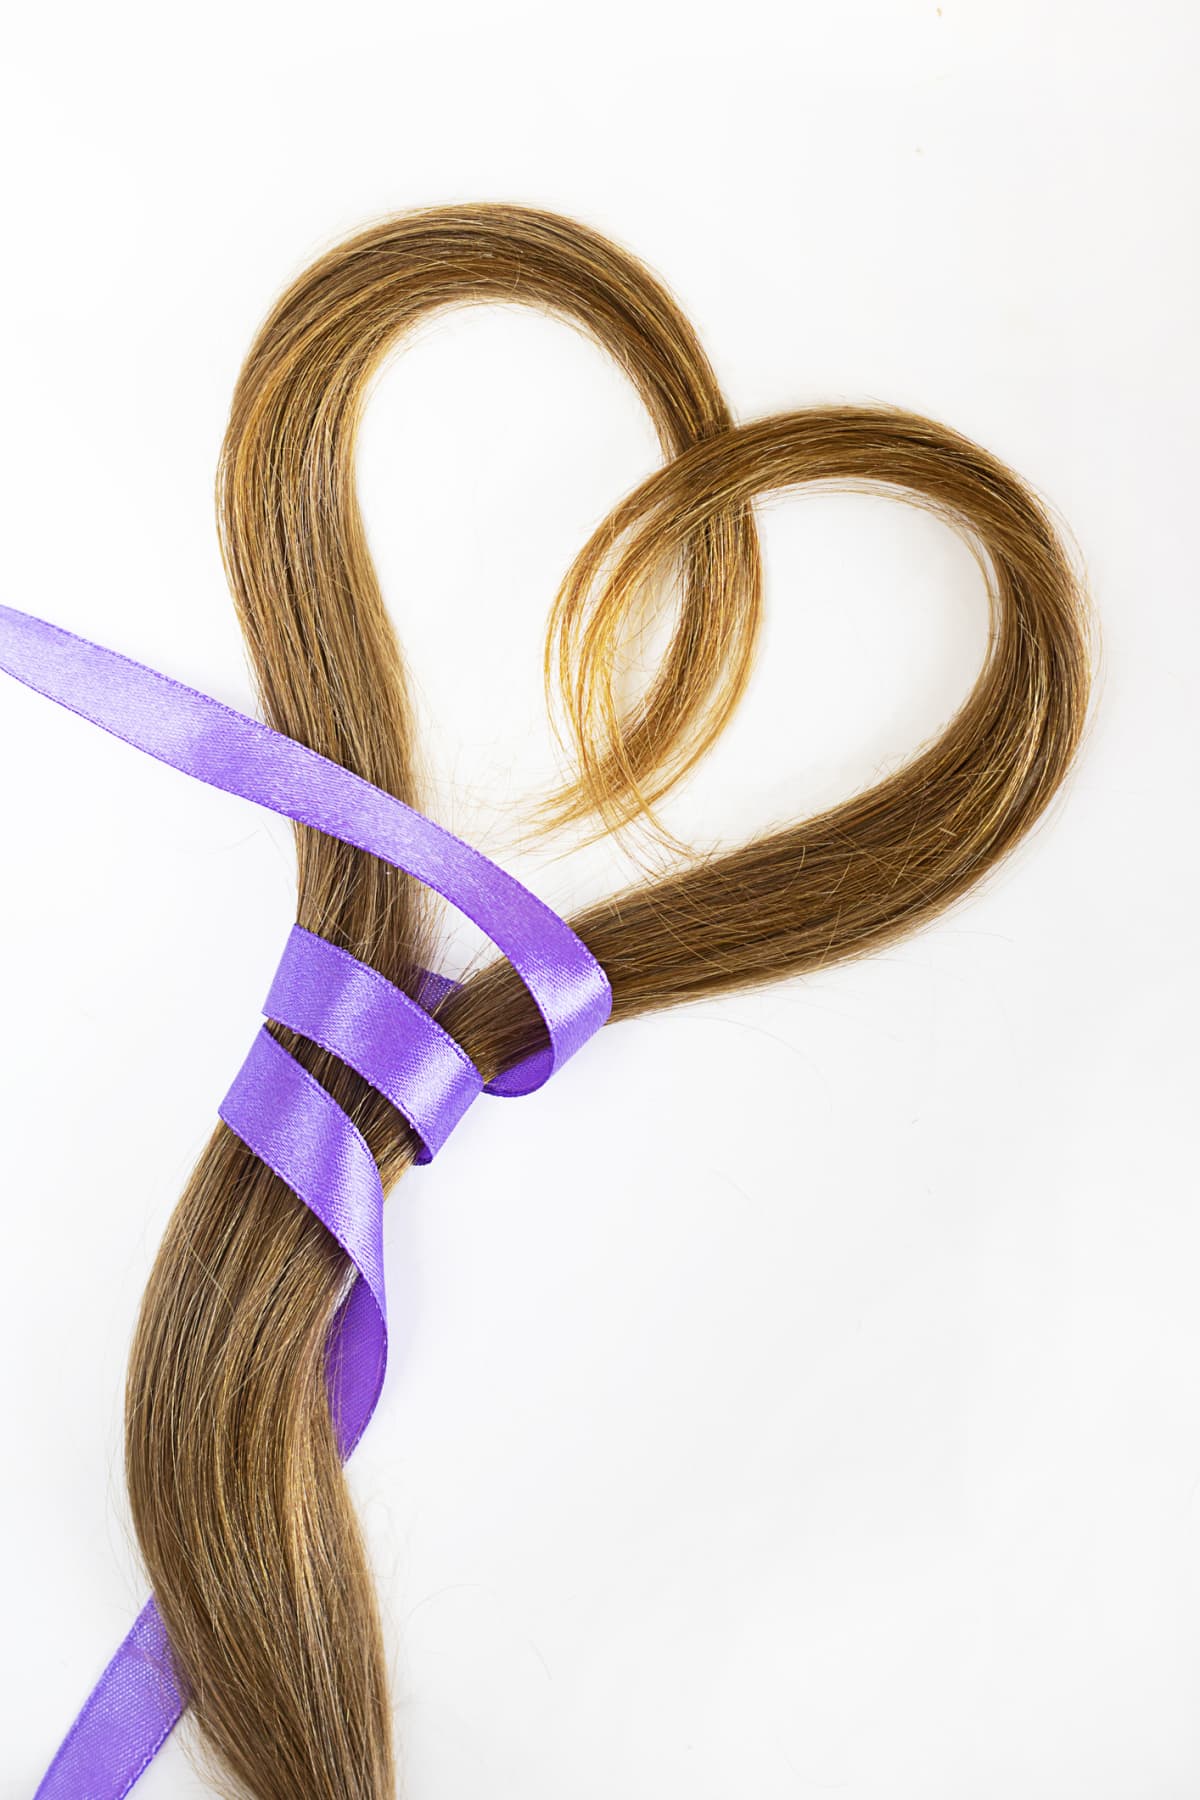 A lock of hair formed into a heart tied with a purple ribbon to symbolize hair donation for a cancer charity